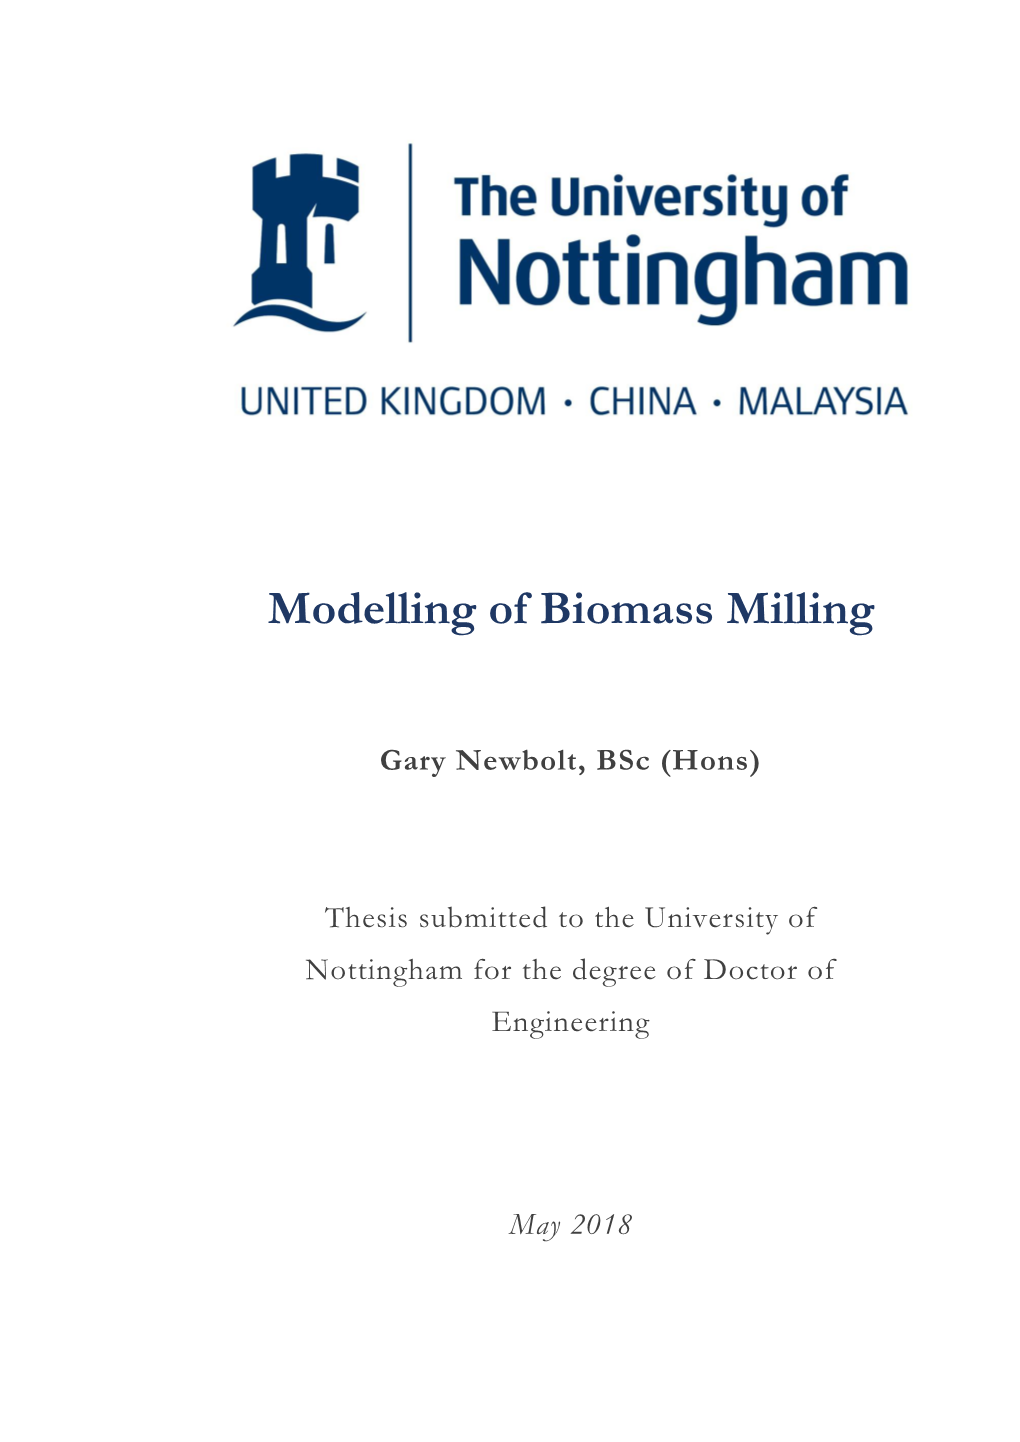 Modelling of Biomass Milling